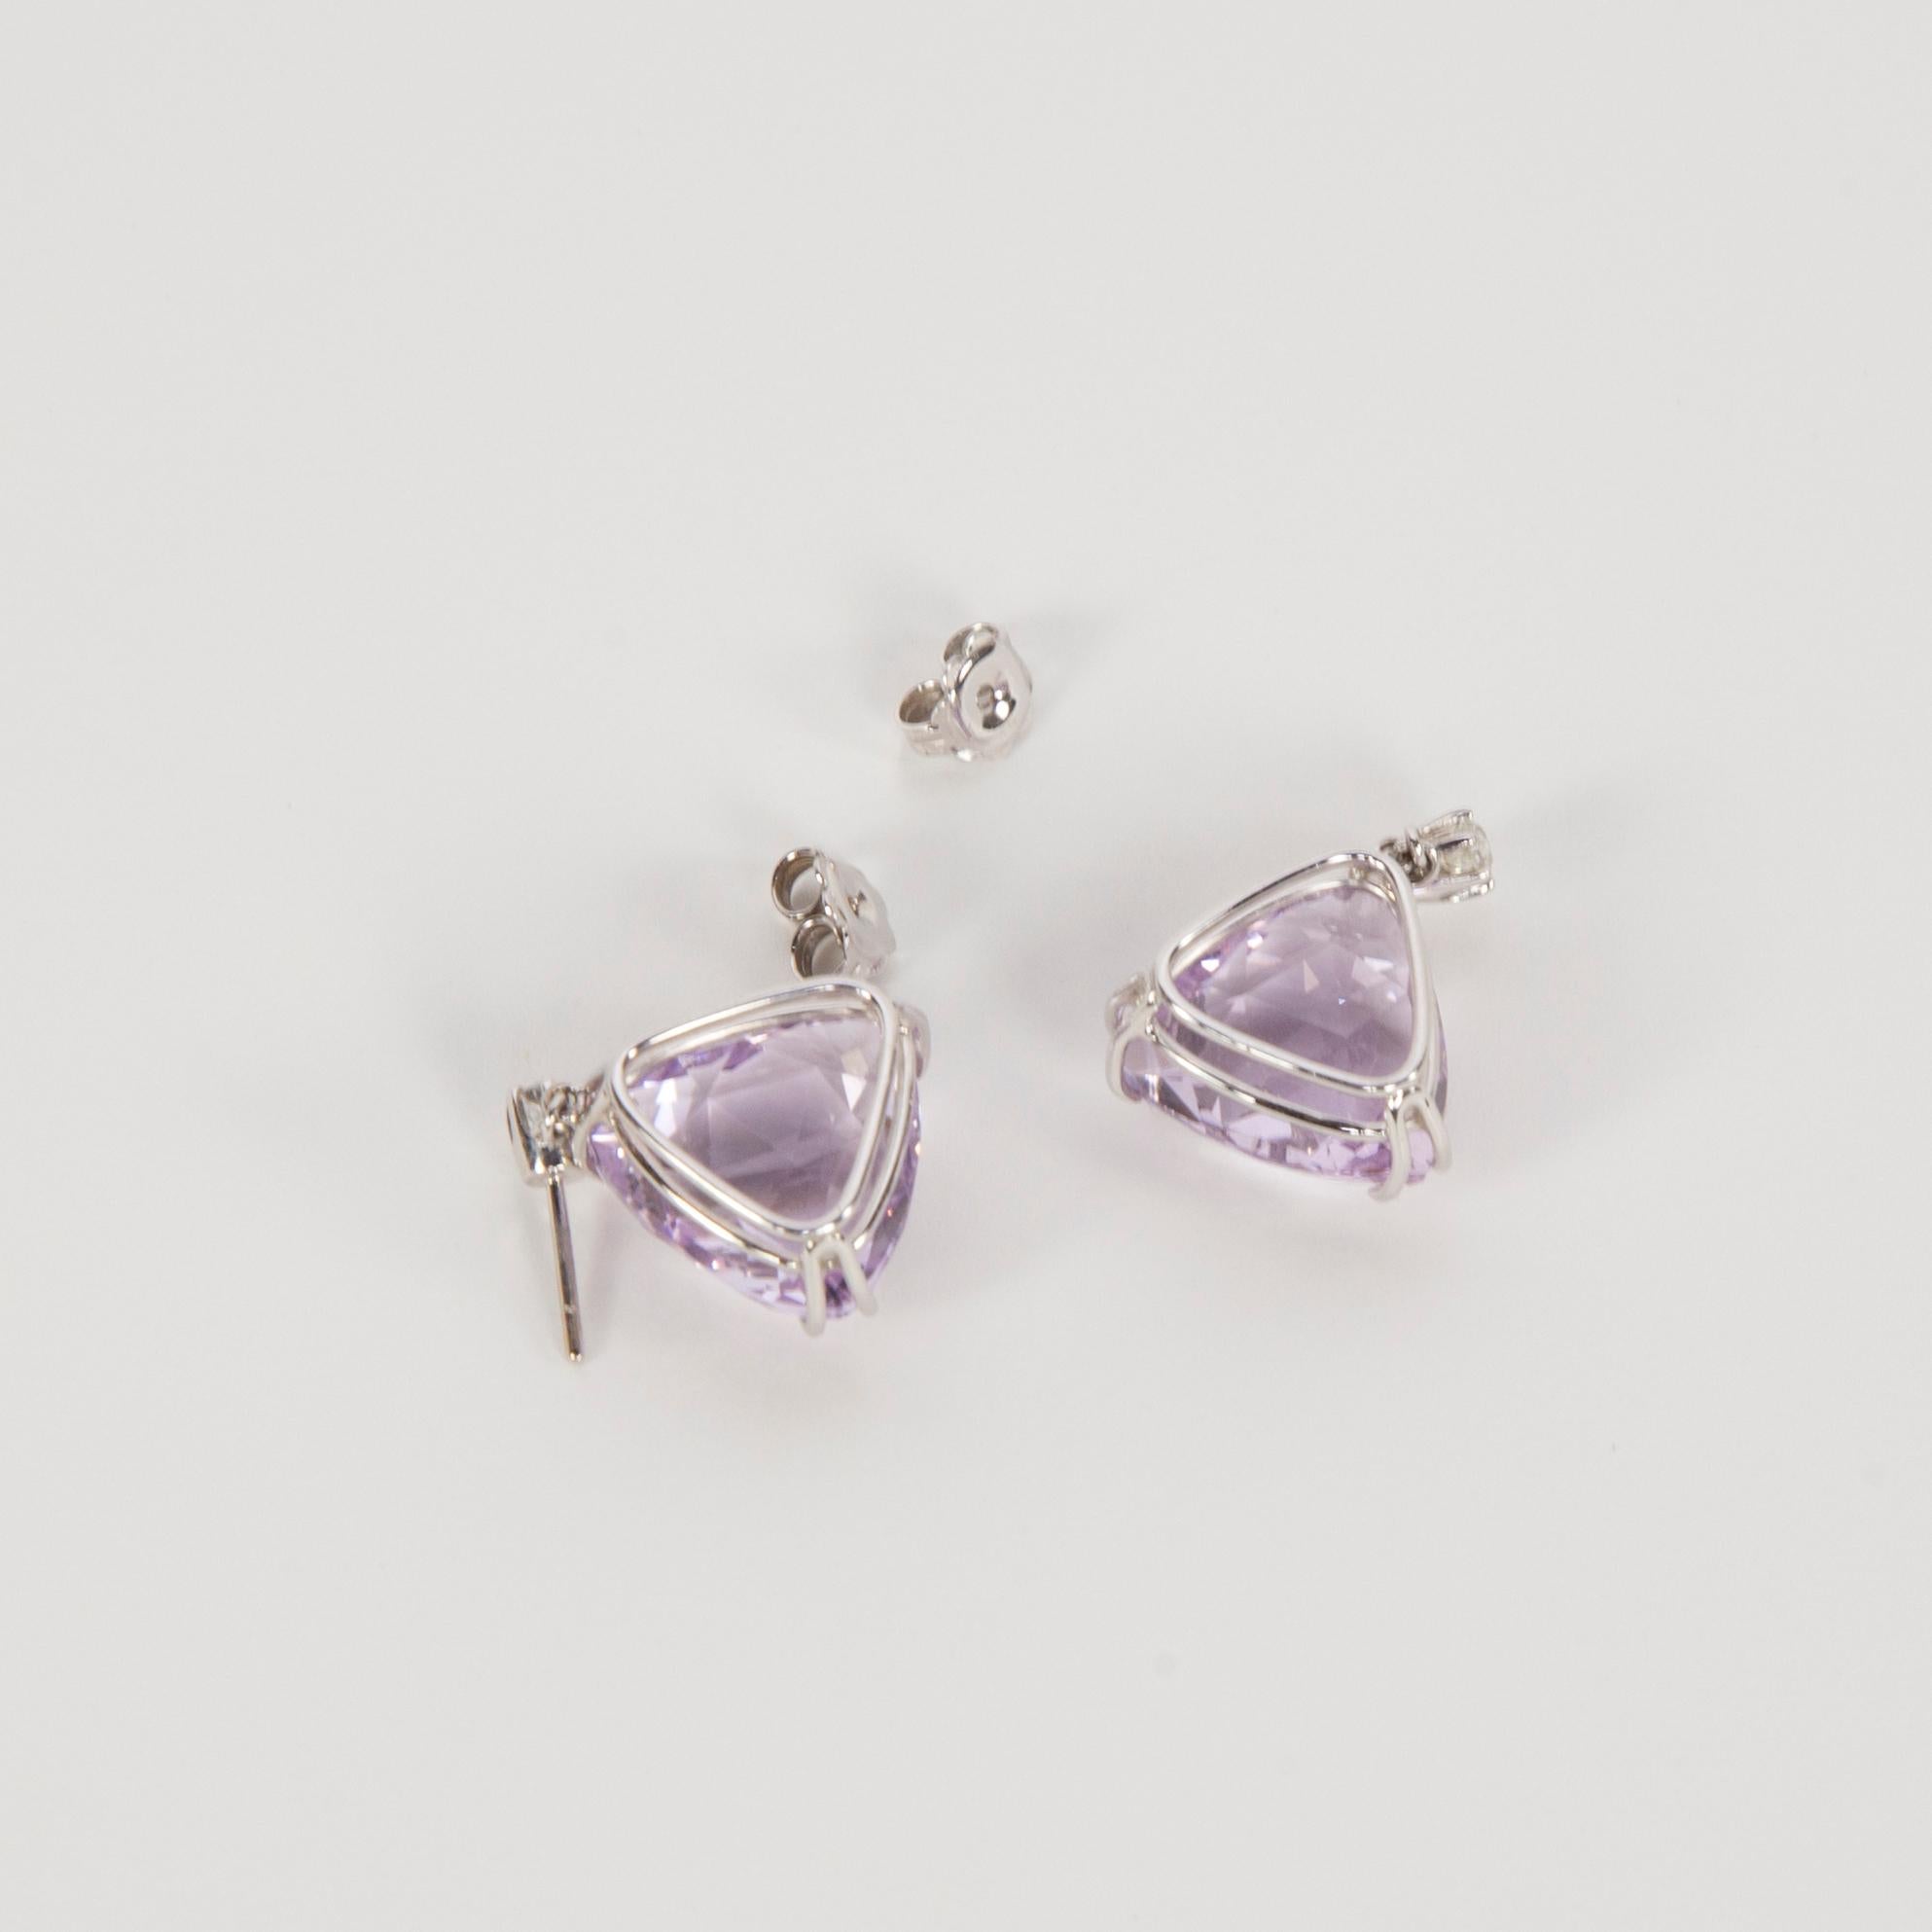 Pair of Amethyst and Diamond Dangle Earrings hand crafted in 14k white gold; featuring 2 Trillion Checker-cut Rose de France Amethyst; 16mm x 15.92mm each with an approx. total weight of 27.56 Carat.; 30mm x 21mm each; enhanced by 2 Old-European cut